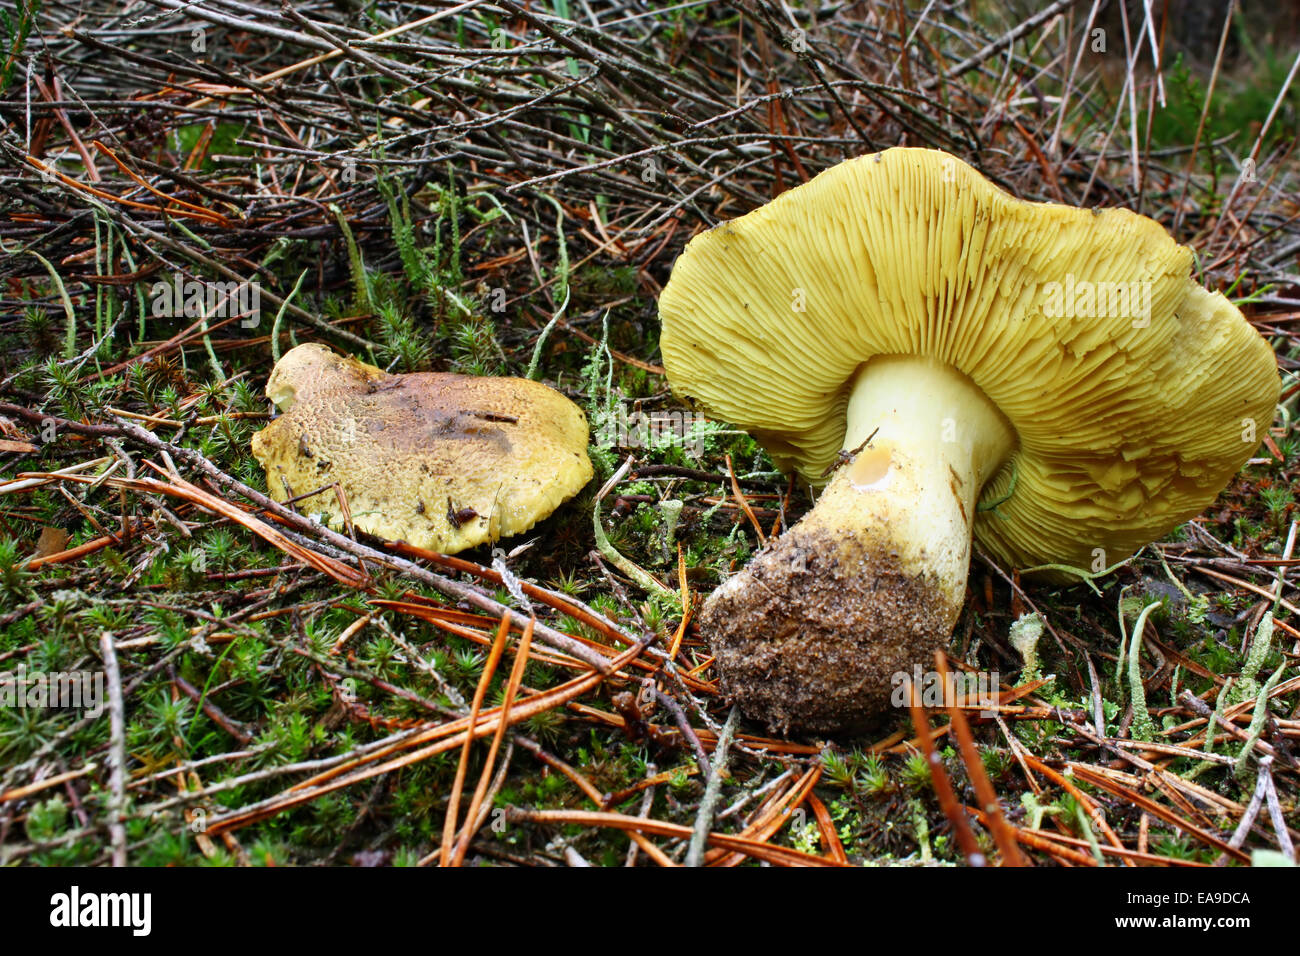 Two mushroom poisonous tricholoma equestre  growing in the forest Stock Photo